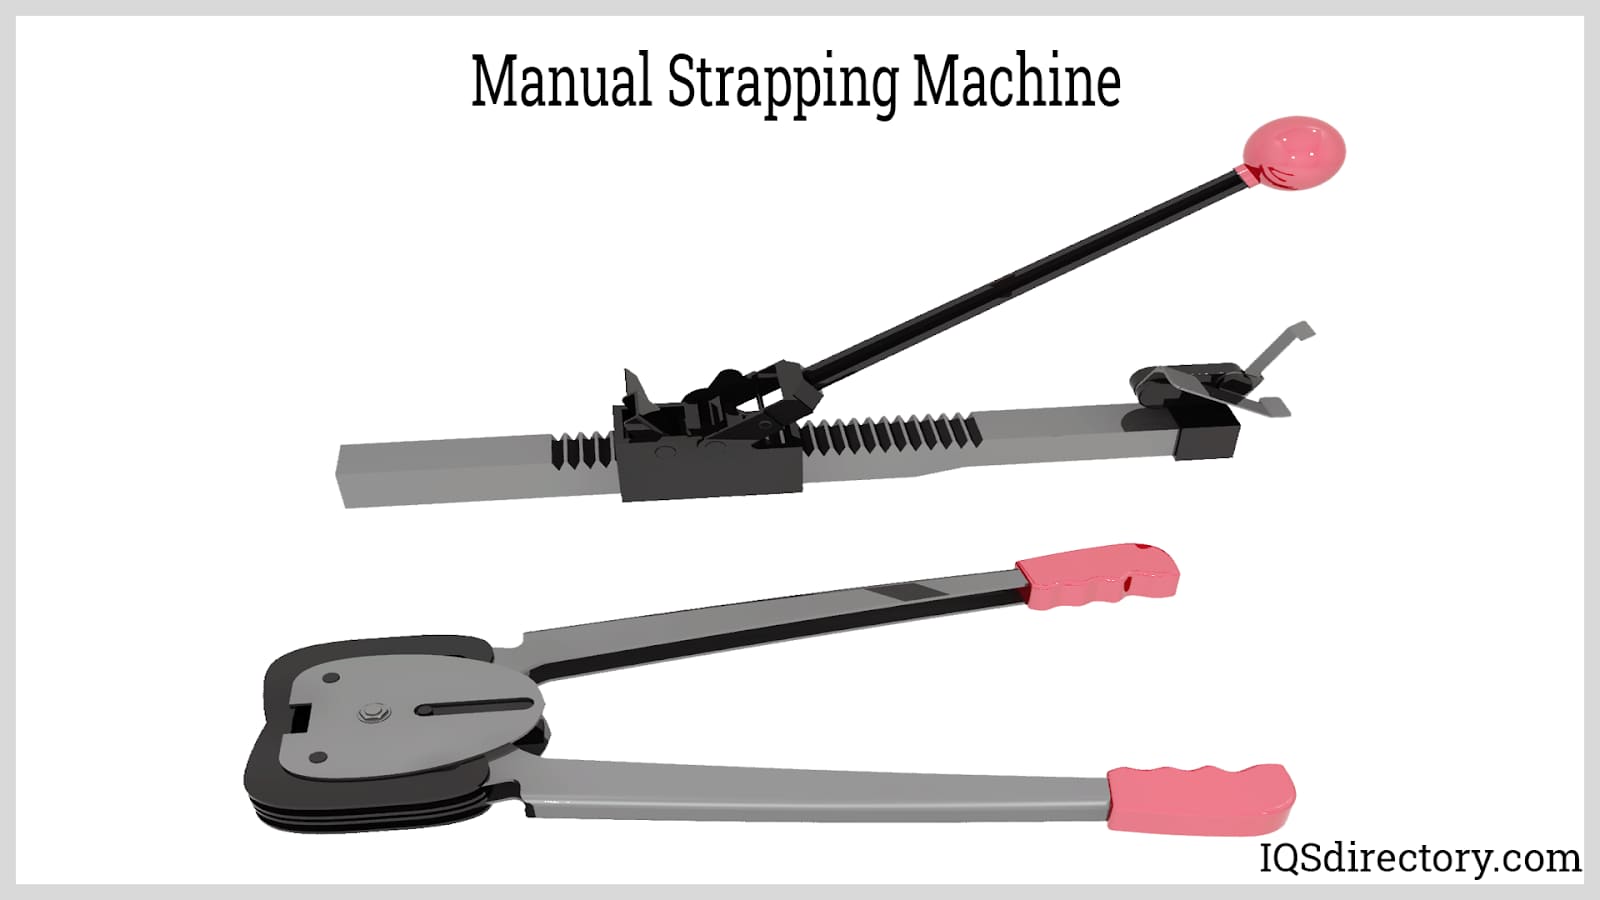 Manual Strapping Machine